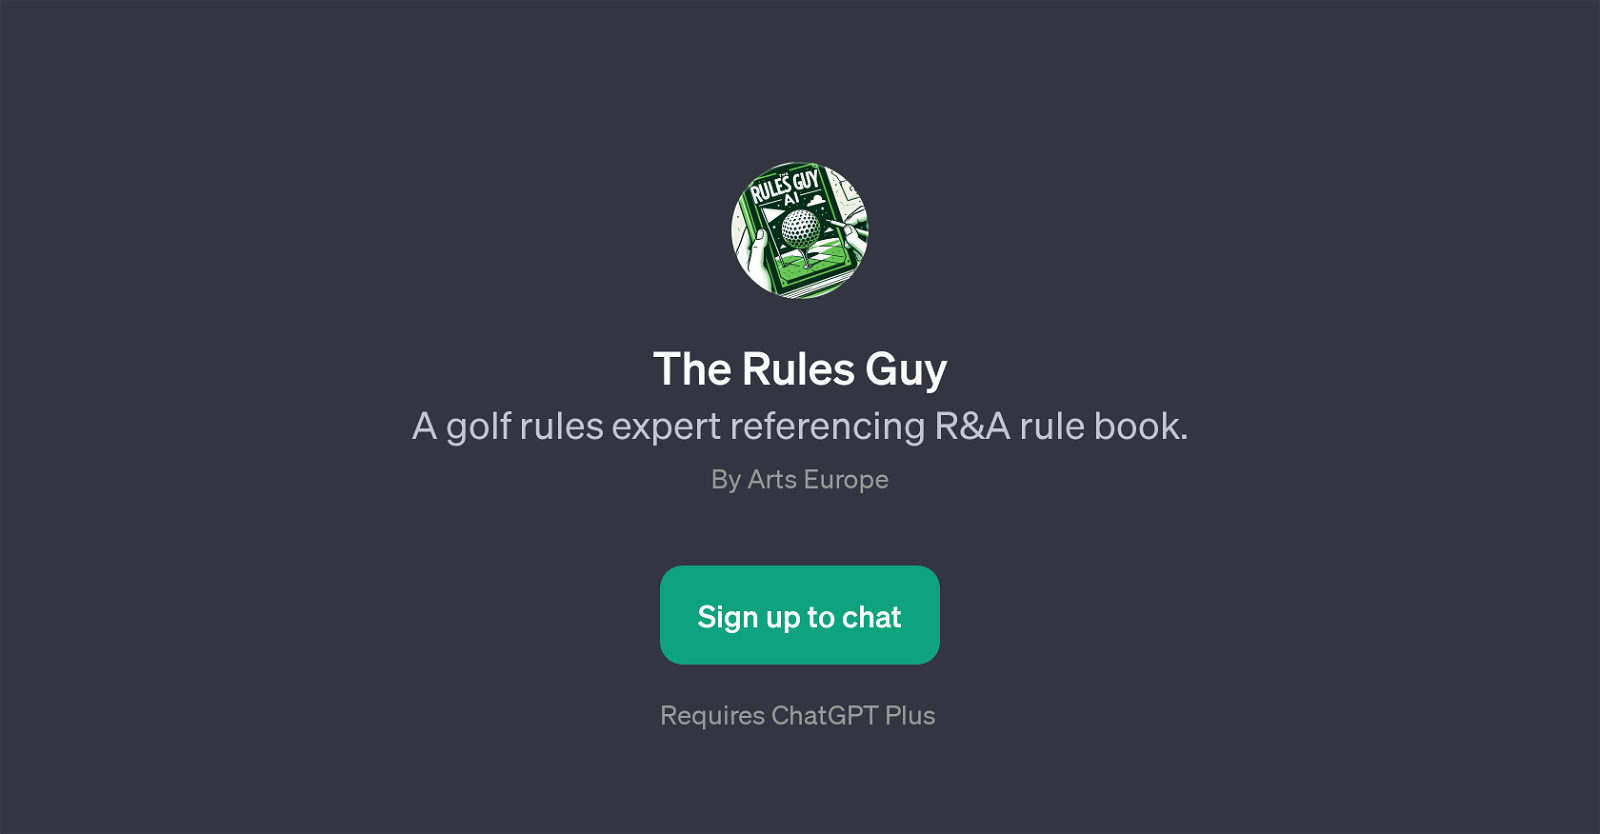 The Rules Guy website